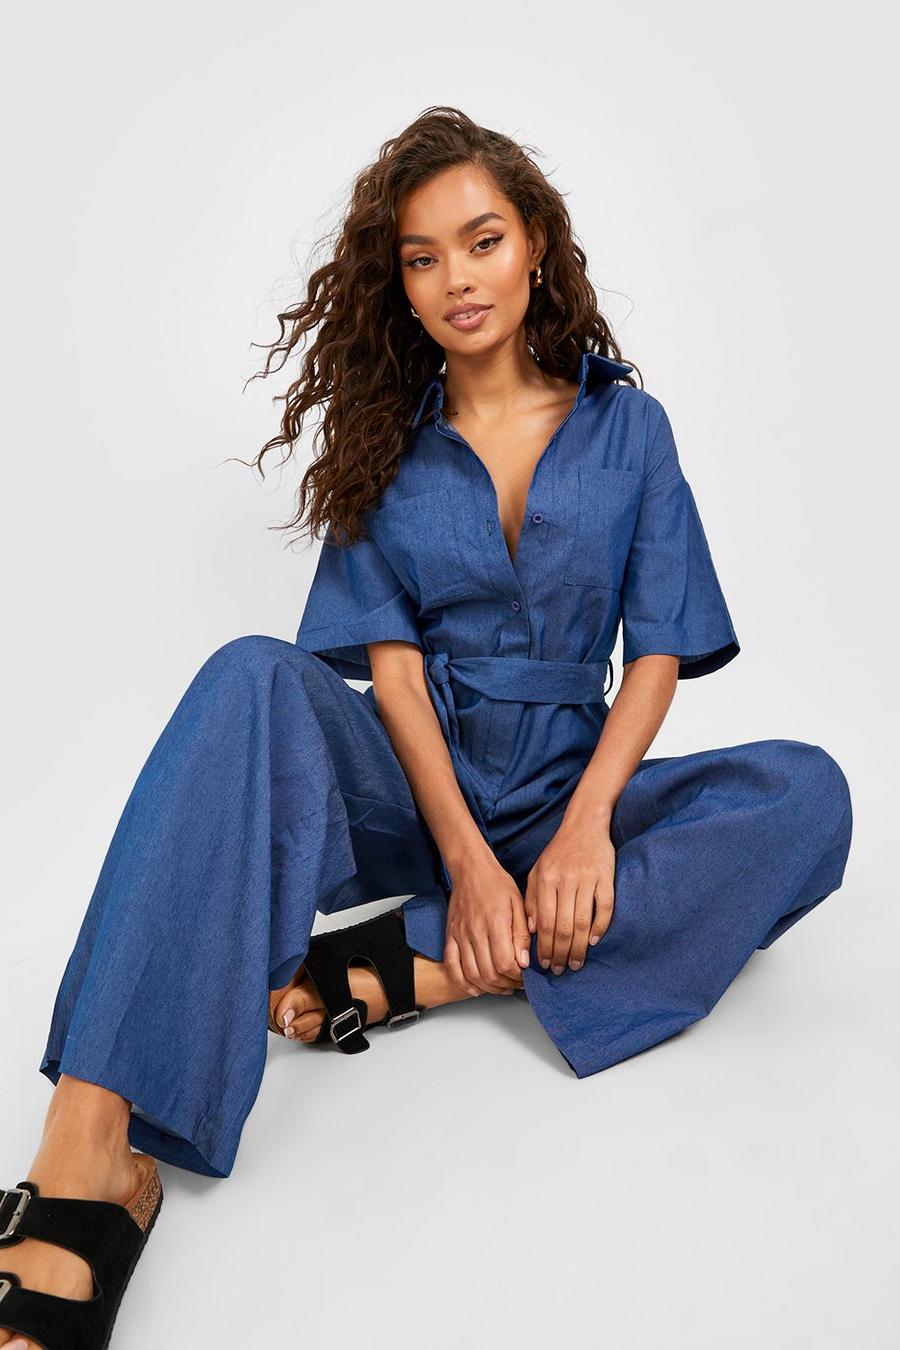 boohoo Maternity Relaxed Wide Leg Overalls - ShopStyle Jumpsuits & Rompers